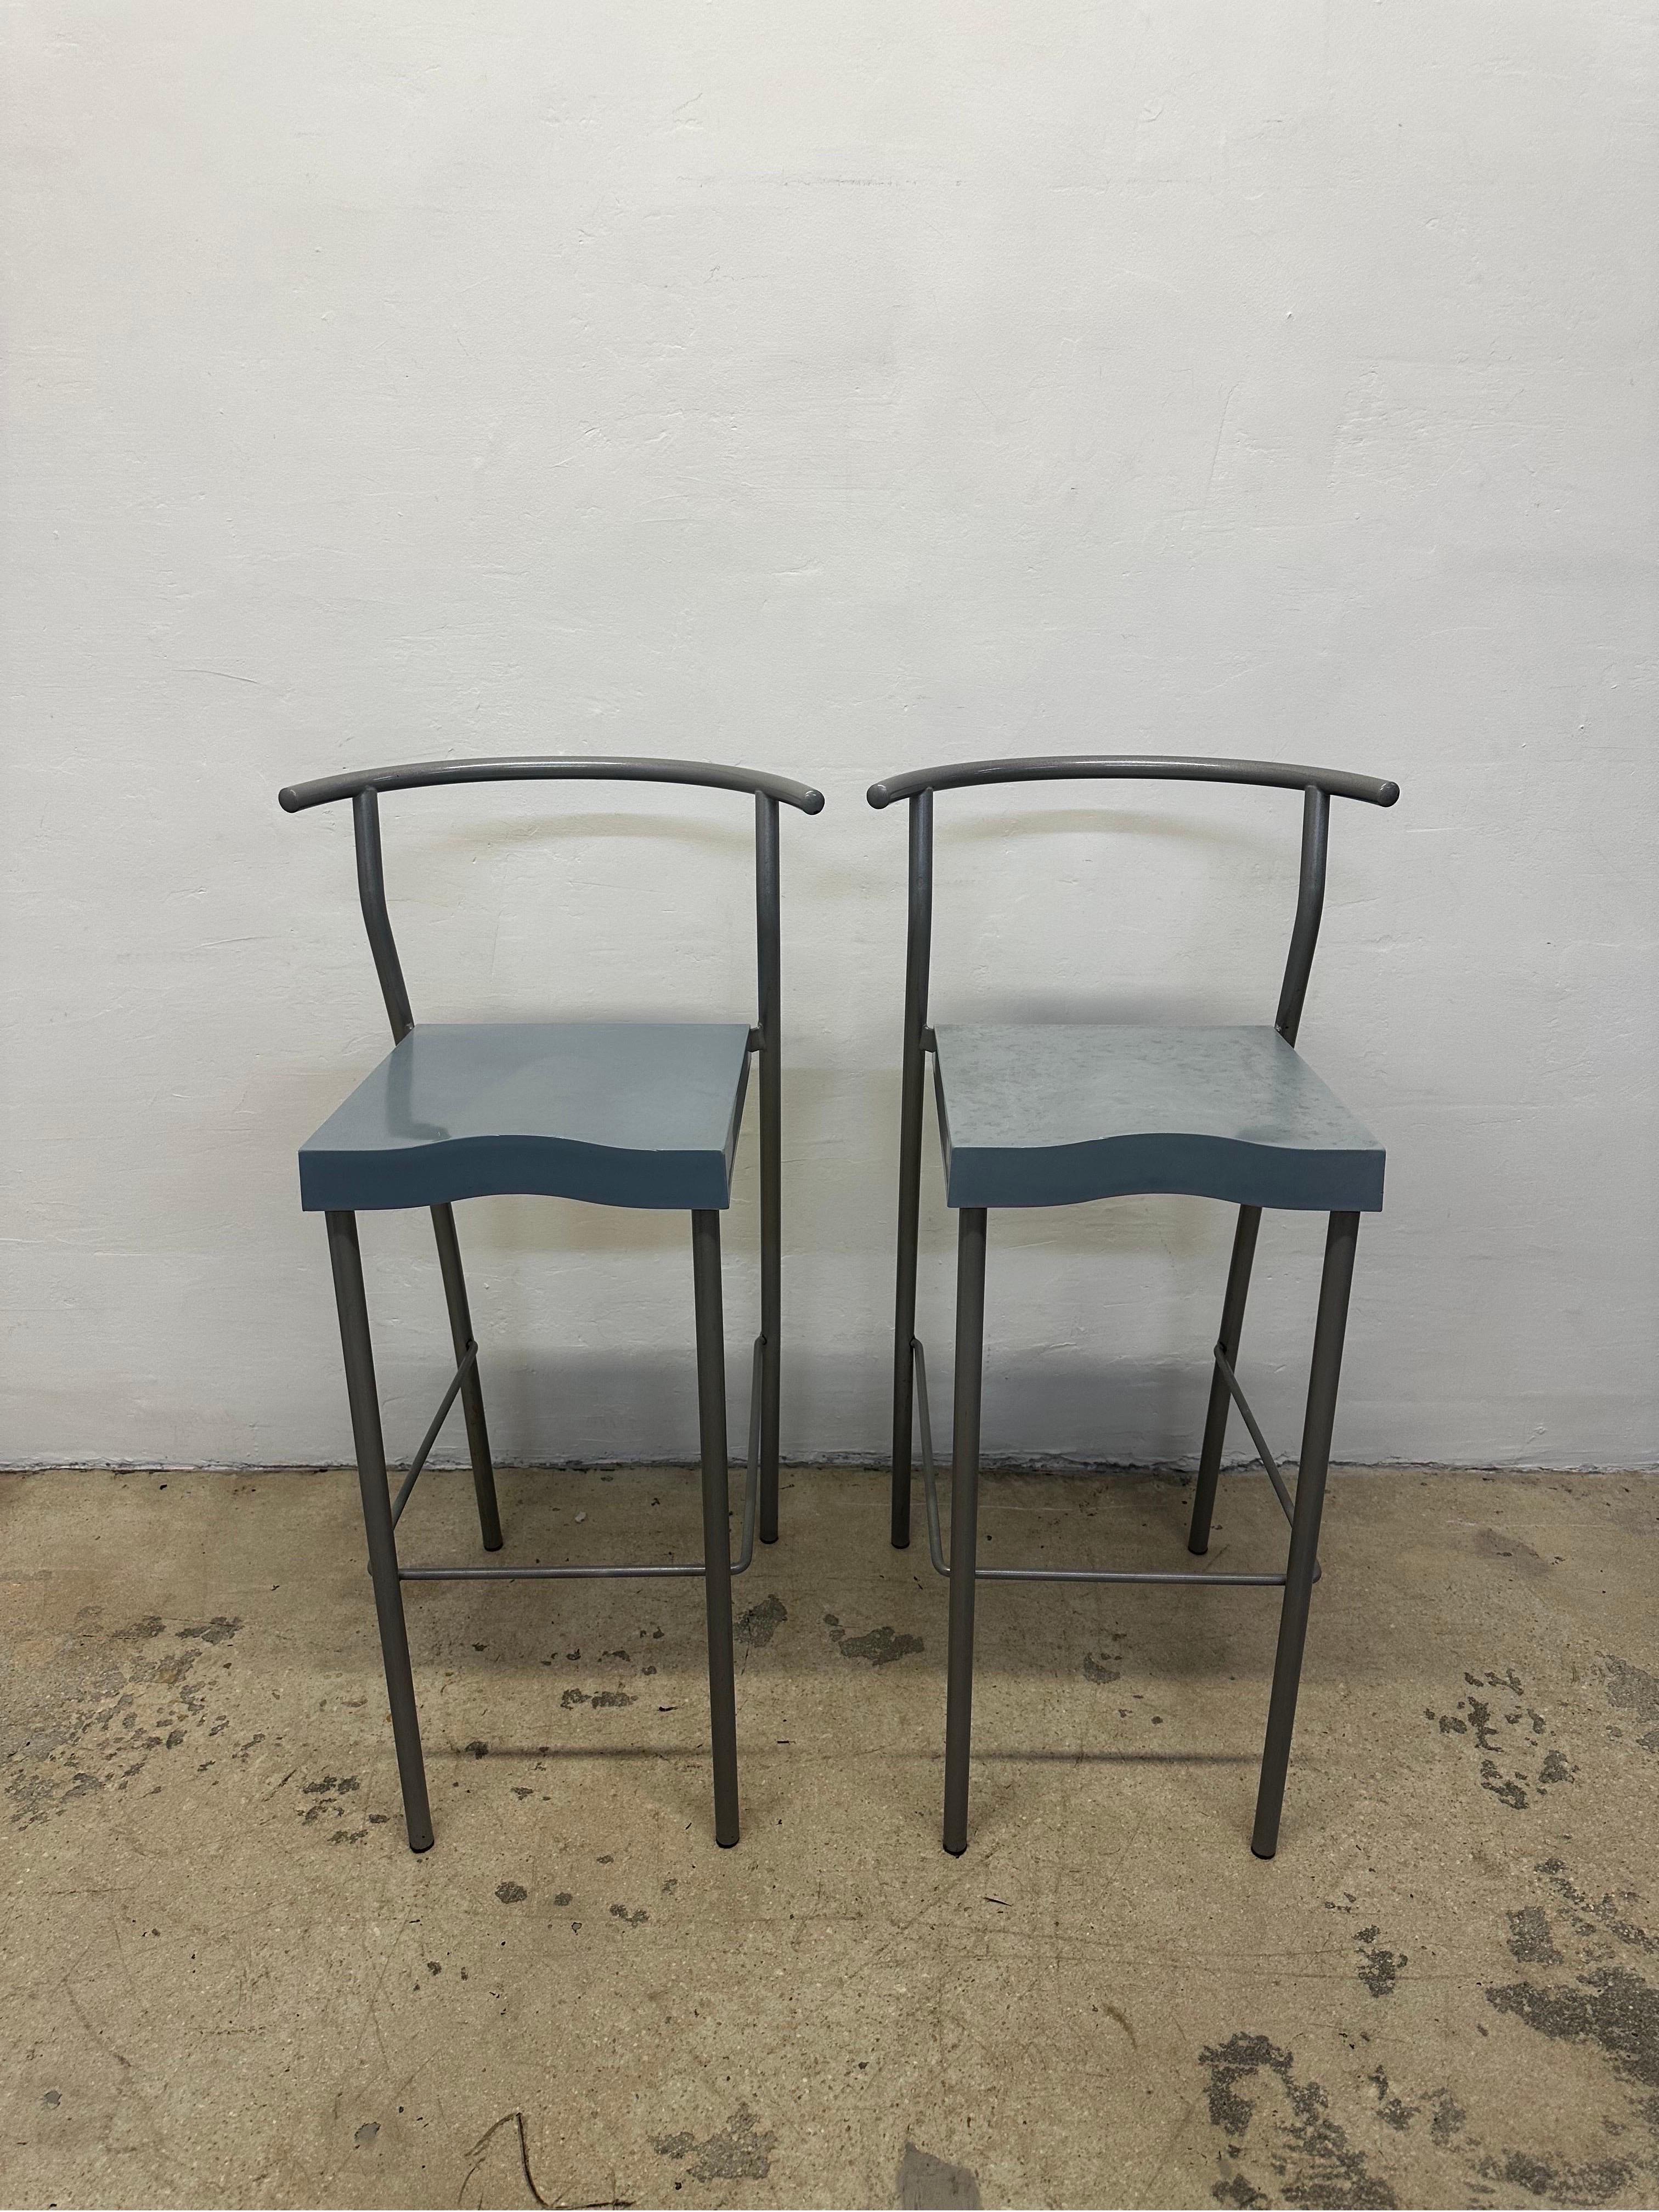 Pair of Philippe Starck designed Hi-Glob barstools with mint green seats and gray lacquered frame for Kartell.